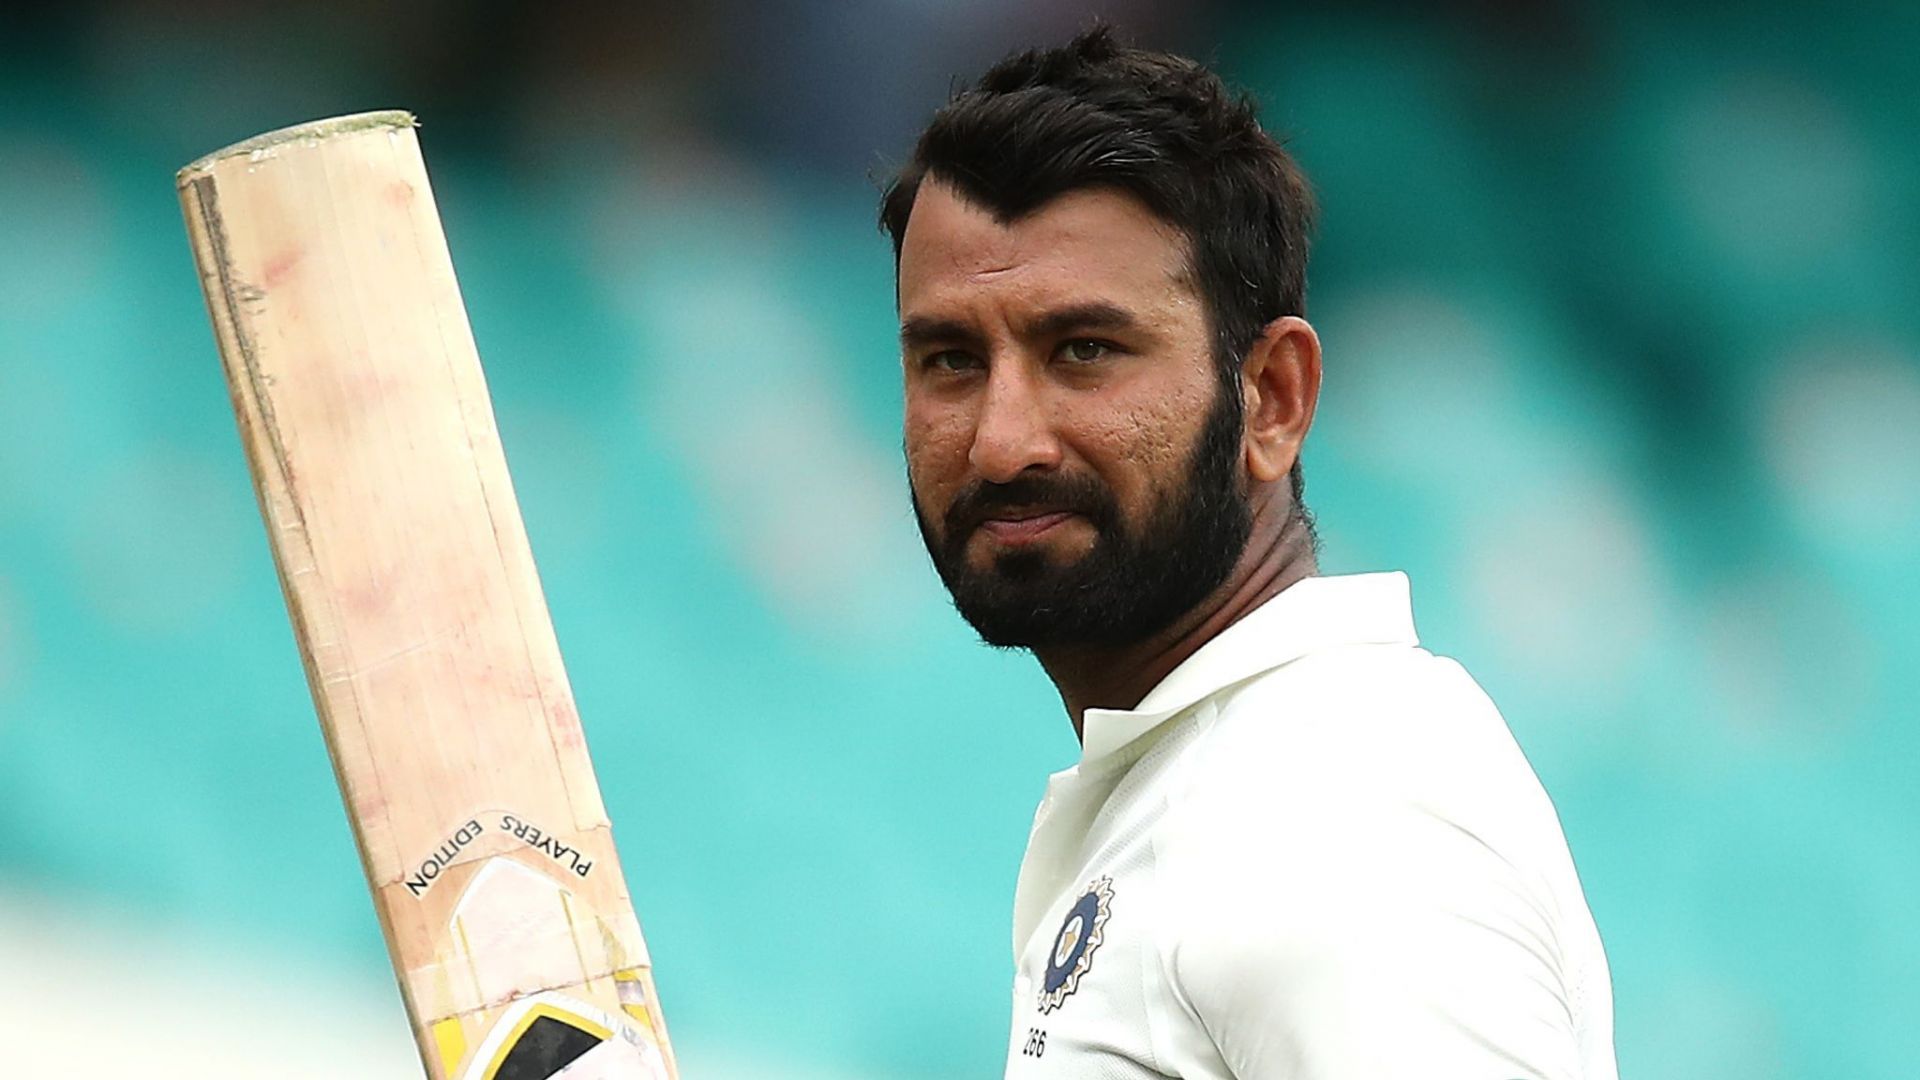 Pujara with a century in the fourth innings ended Karnataka&#039;s campaign in Ranji Trophy 2008/09